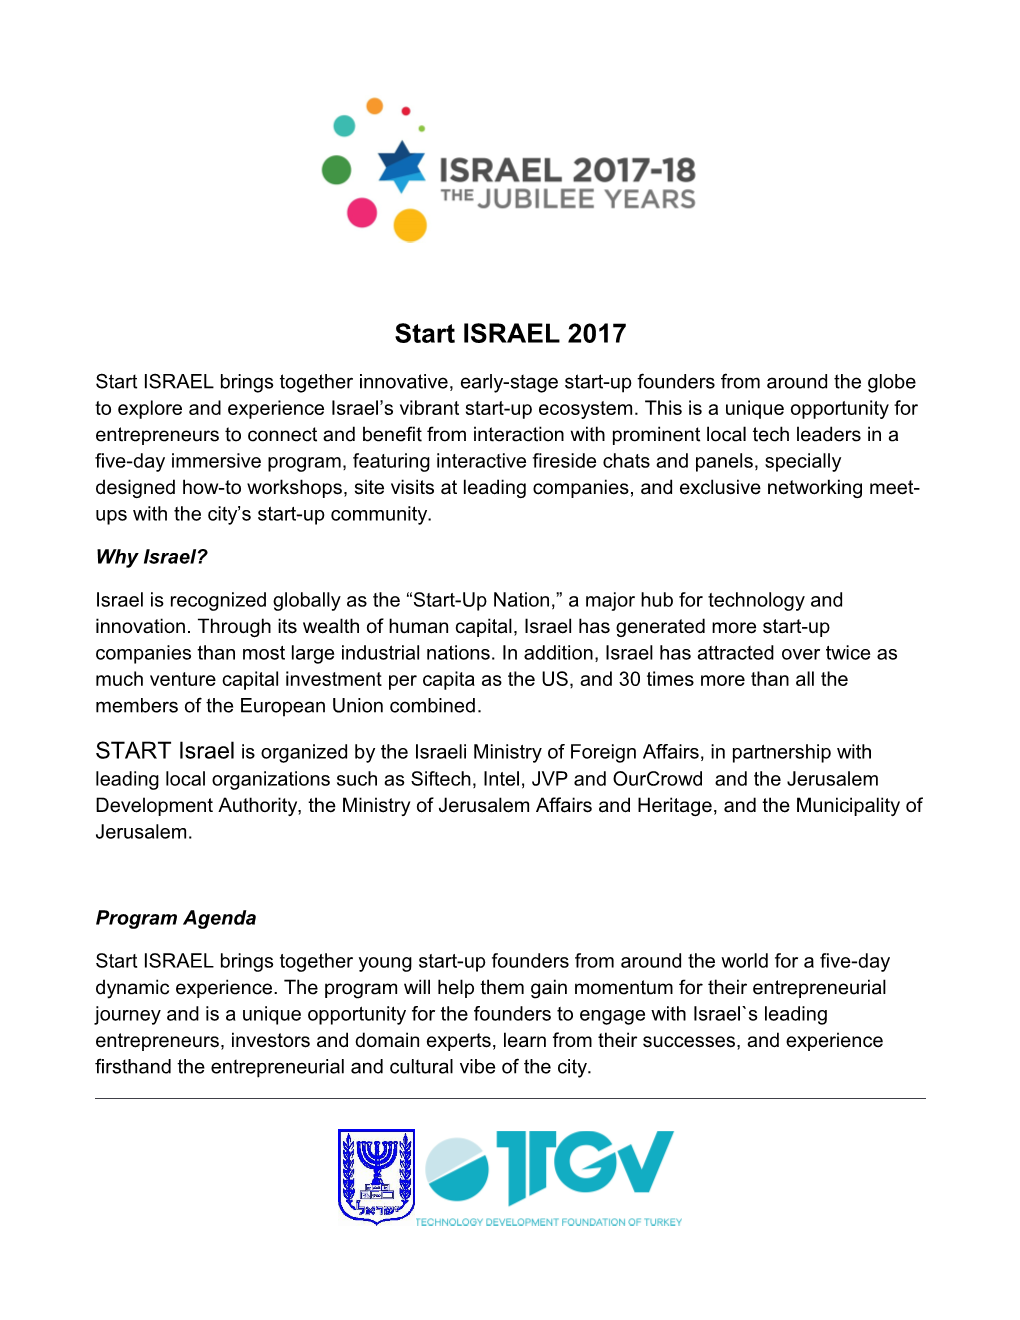 Start ISRAEL Brings Together Innovative, Early-Stage Start-Up Founders from Around The